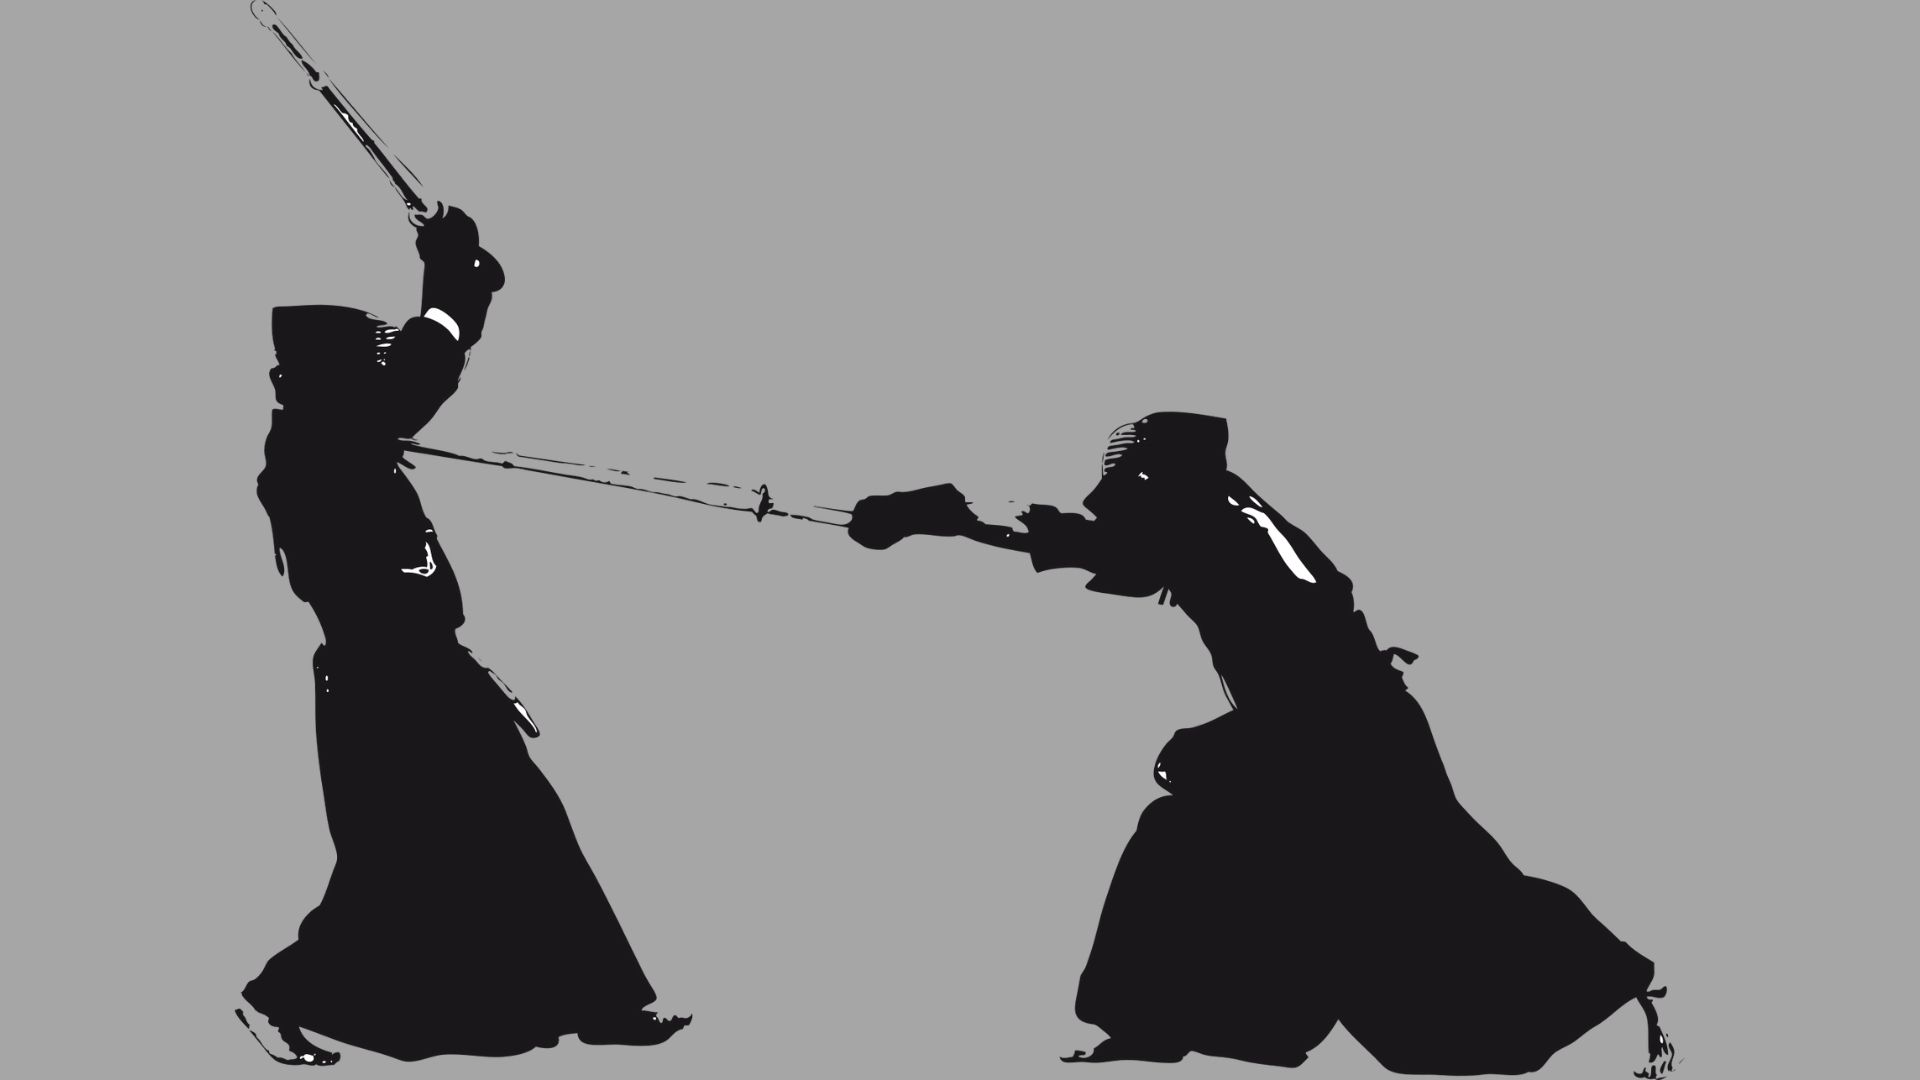 Two people contending in Kendo